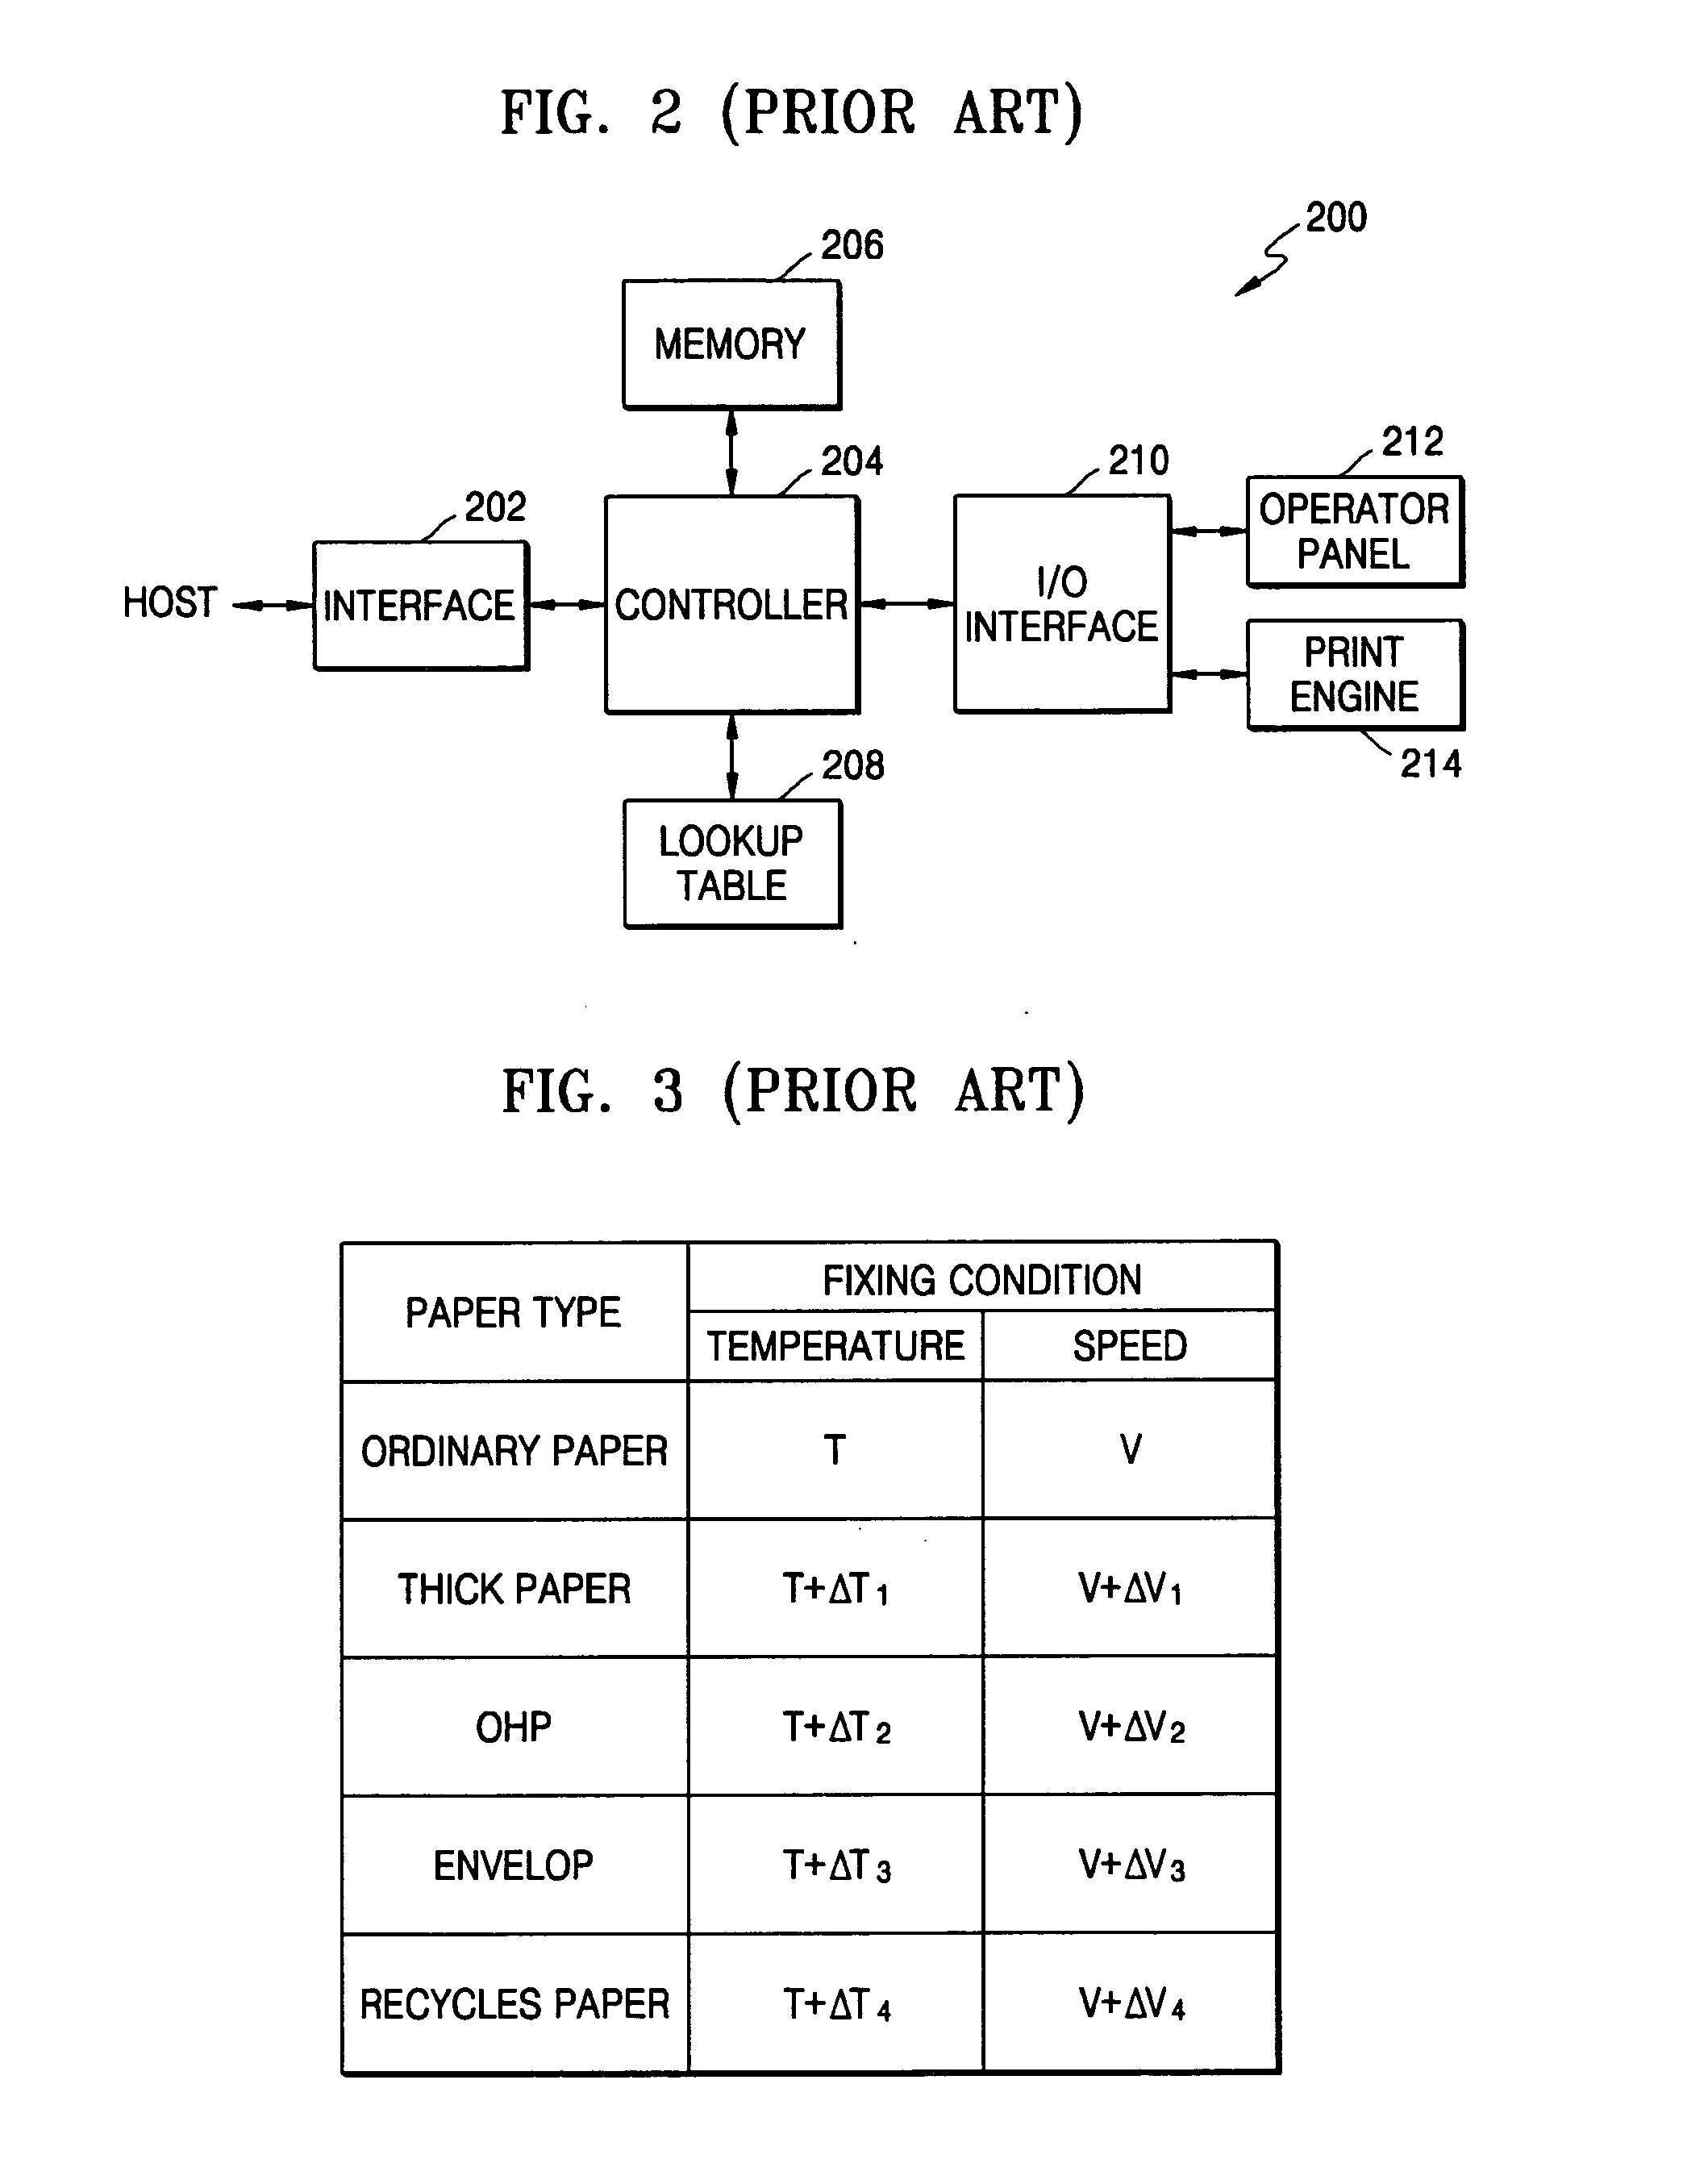 Method and apparatus for controlling a fixer of a printer